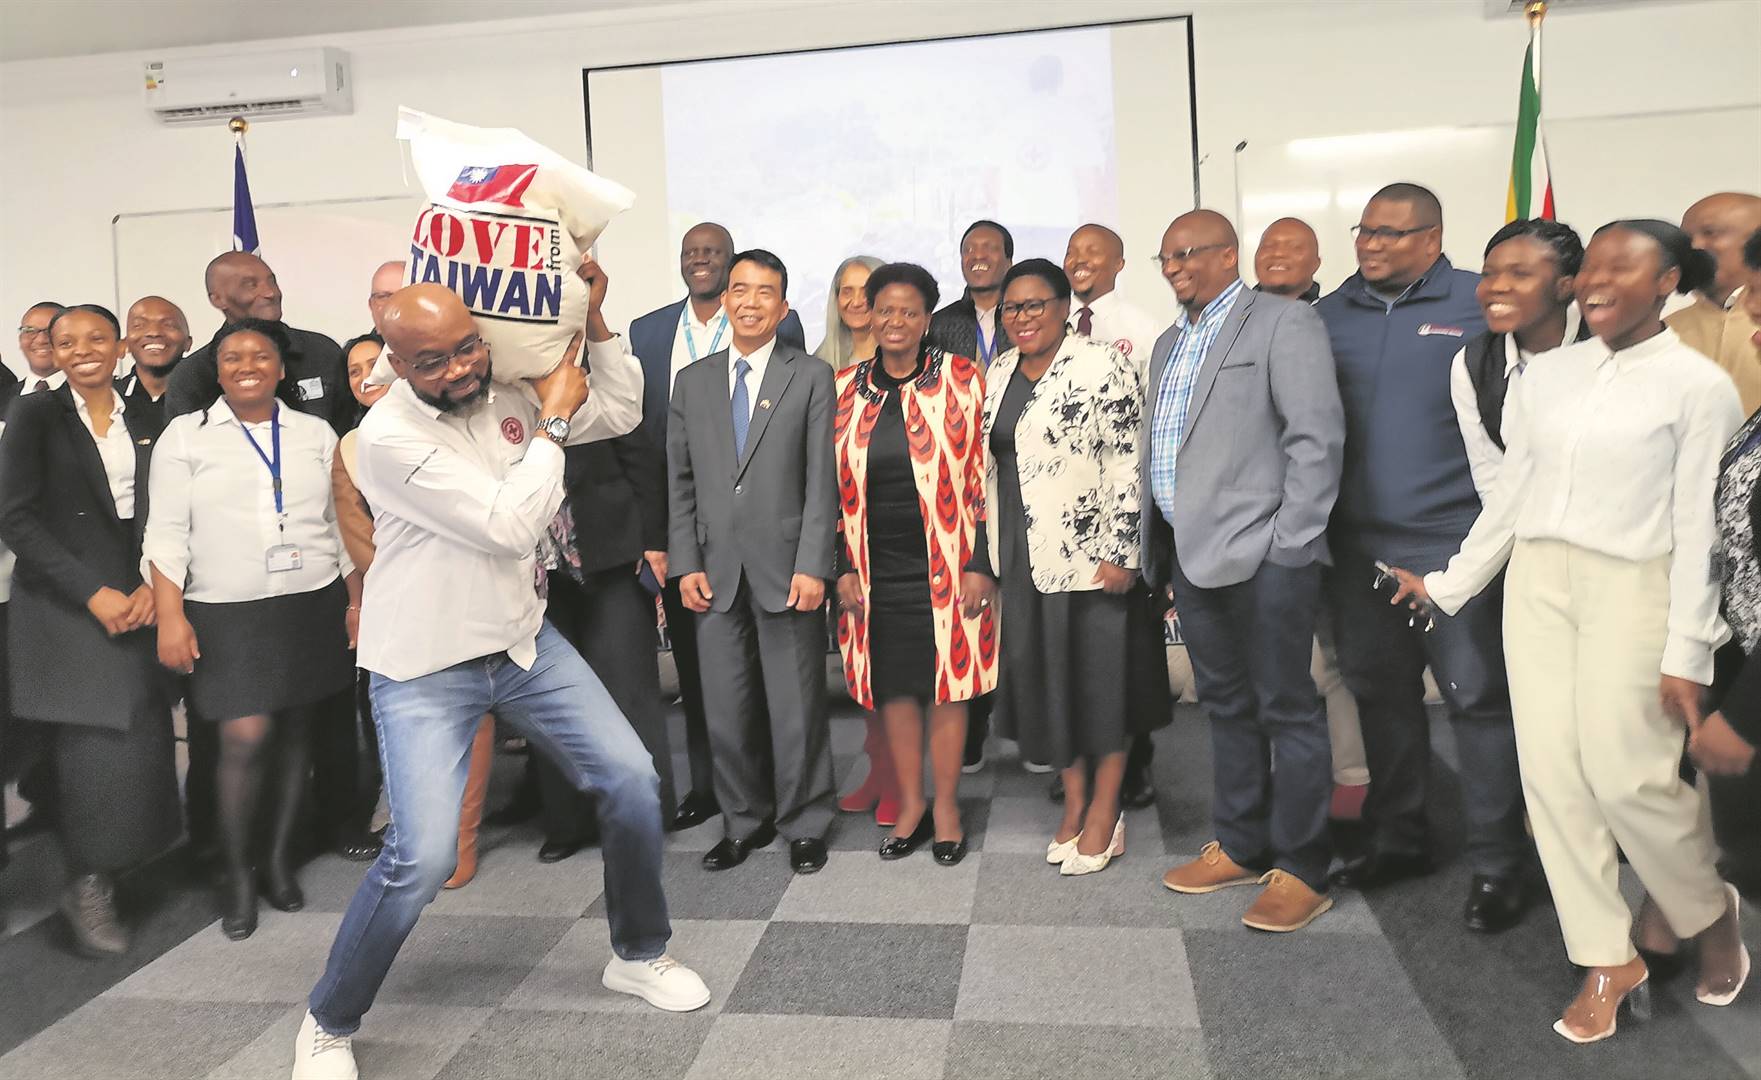 Dignitaries and representatives from various non-profit organisations gathered at the South African Red Cross Society’s office in Wynberg on Tuesday 13 September for the official handover of 40 tons of rice, a donation from the Taiwanese government. PHOTO: Nettalie Viljoen